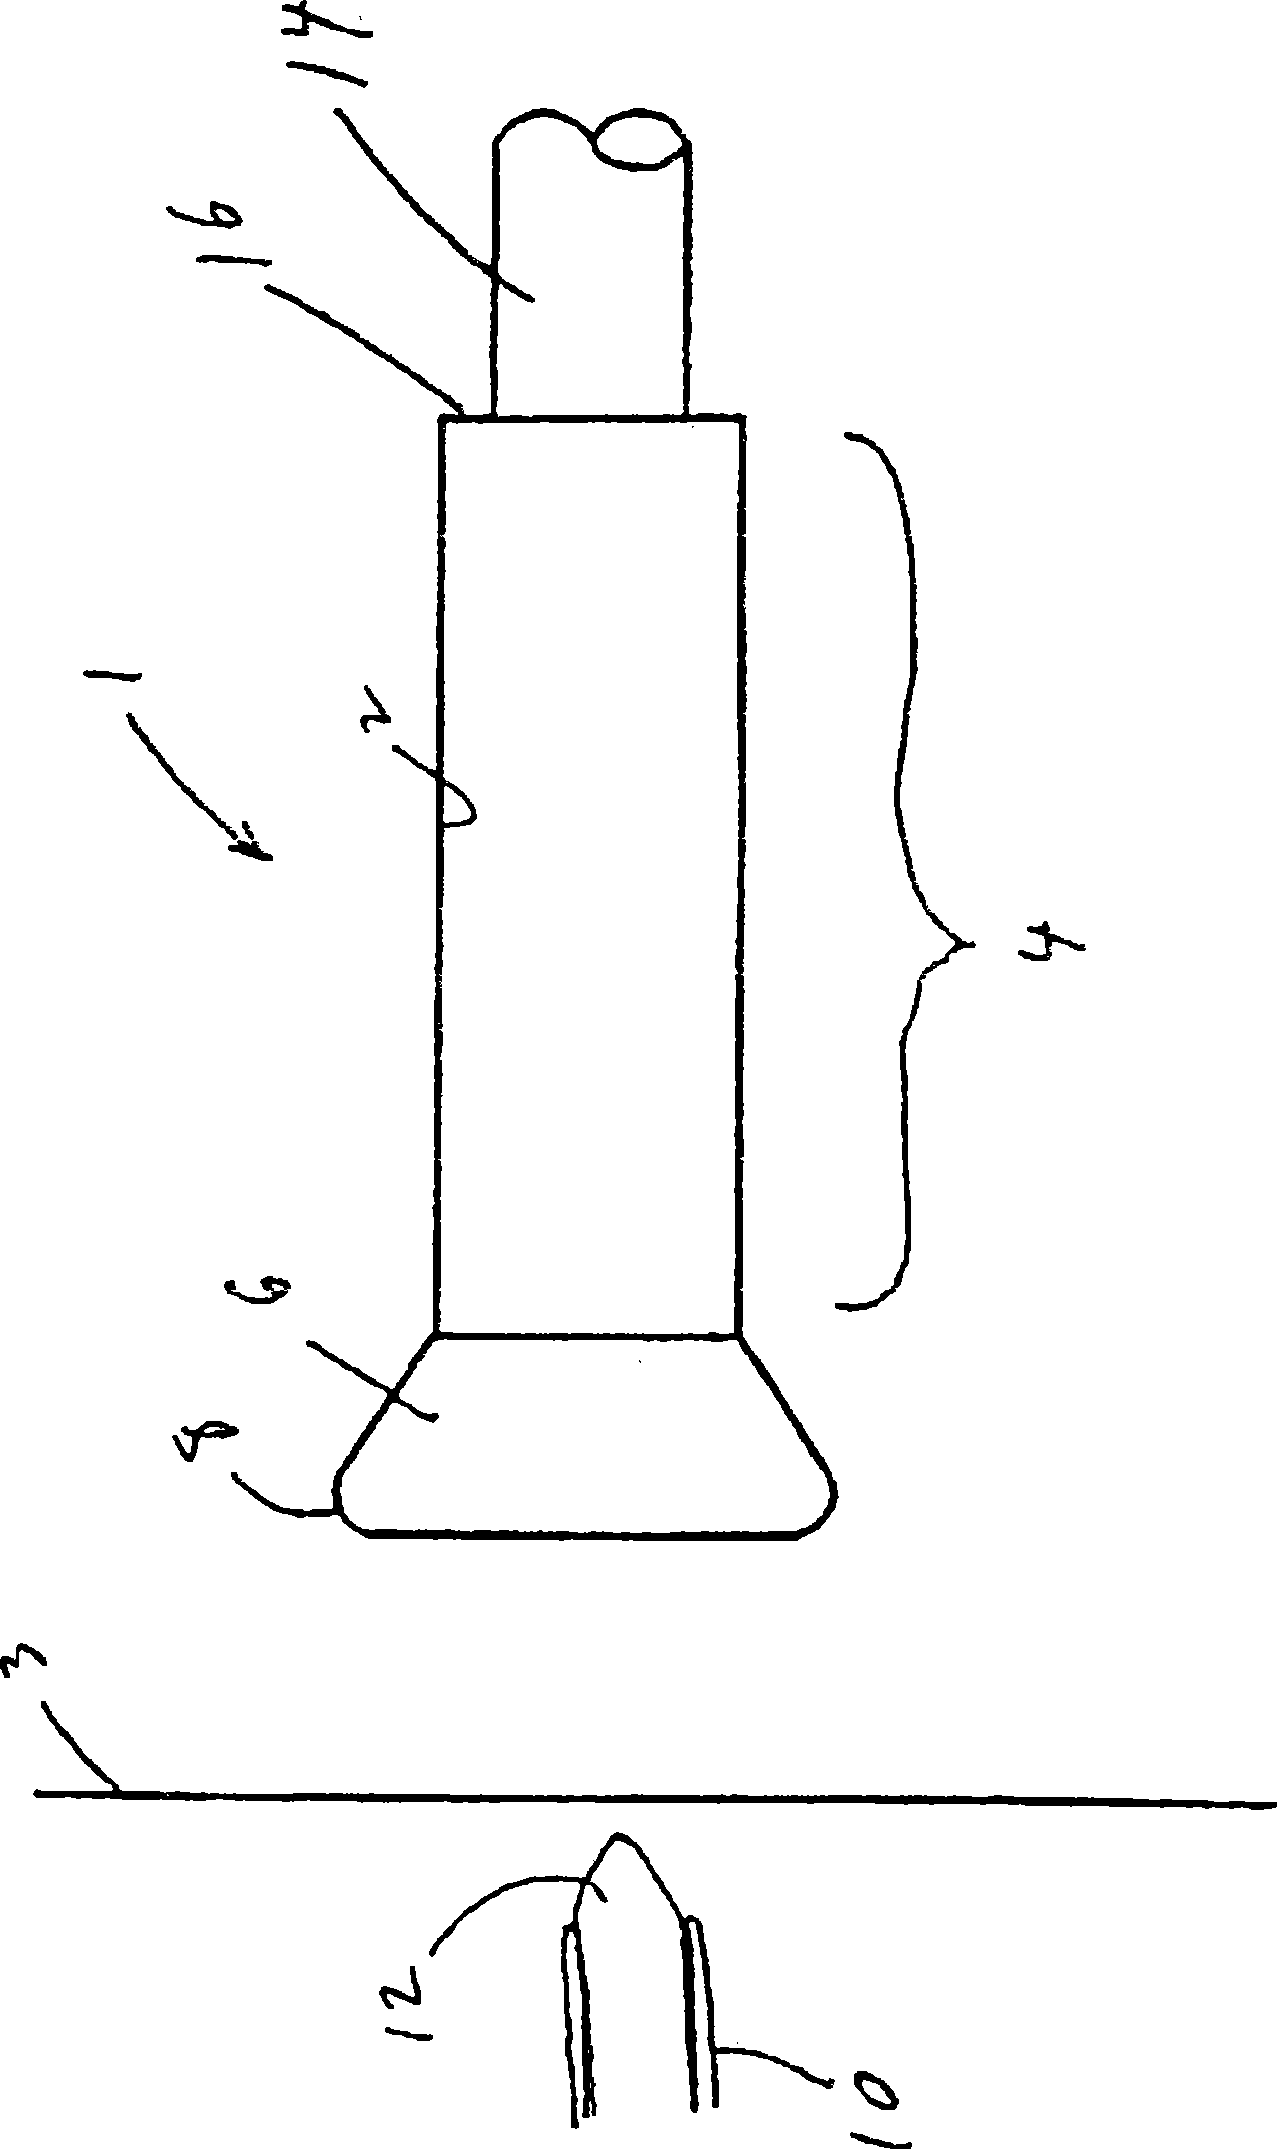 Device for overcoming infection contamination in tissue bag surrounding implantation instrument